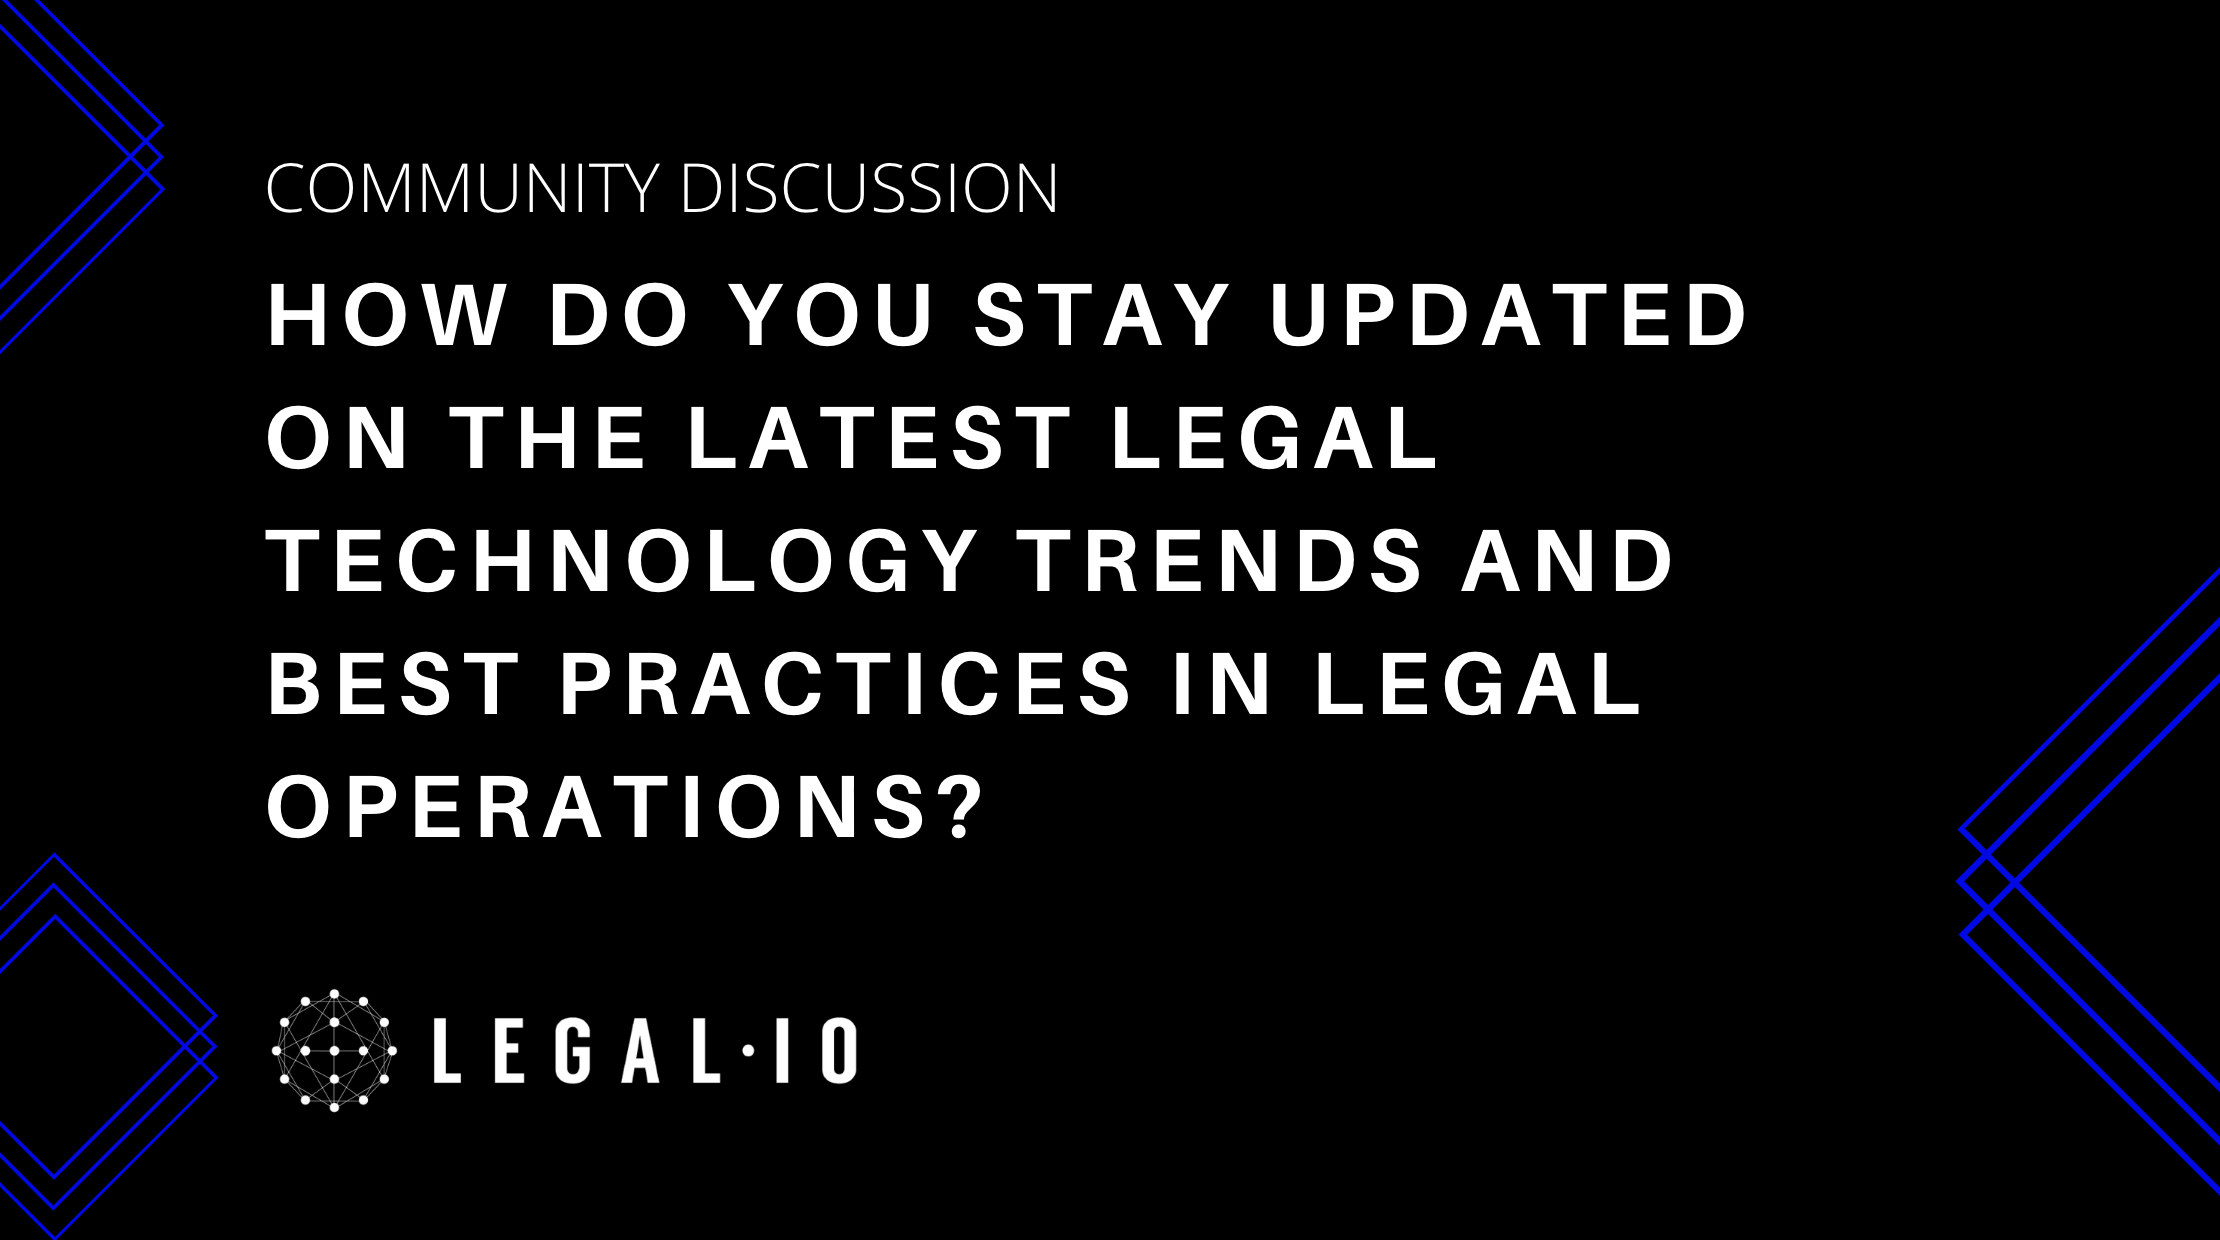 Community Discussion: How do you stay updated on the latest legal technology trends and best practices in legal operations?